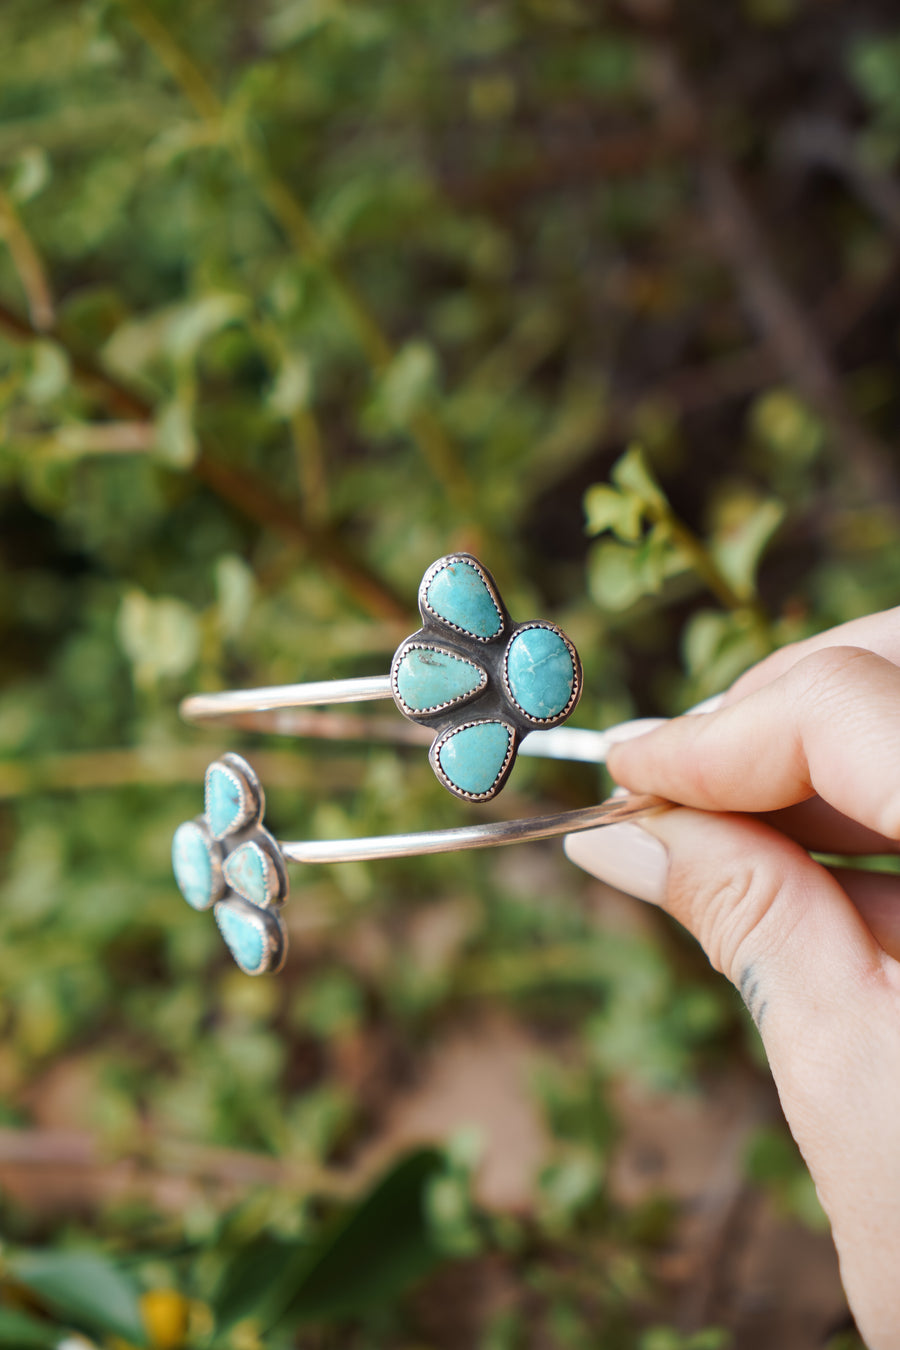 Boho Arm Band in Turquoise Mountain